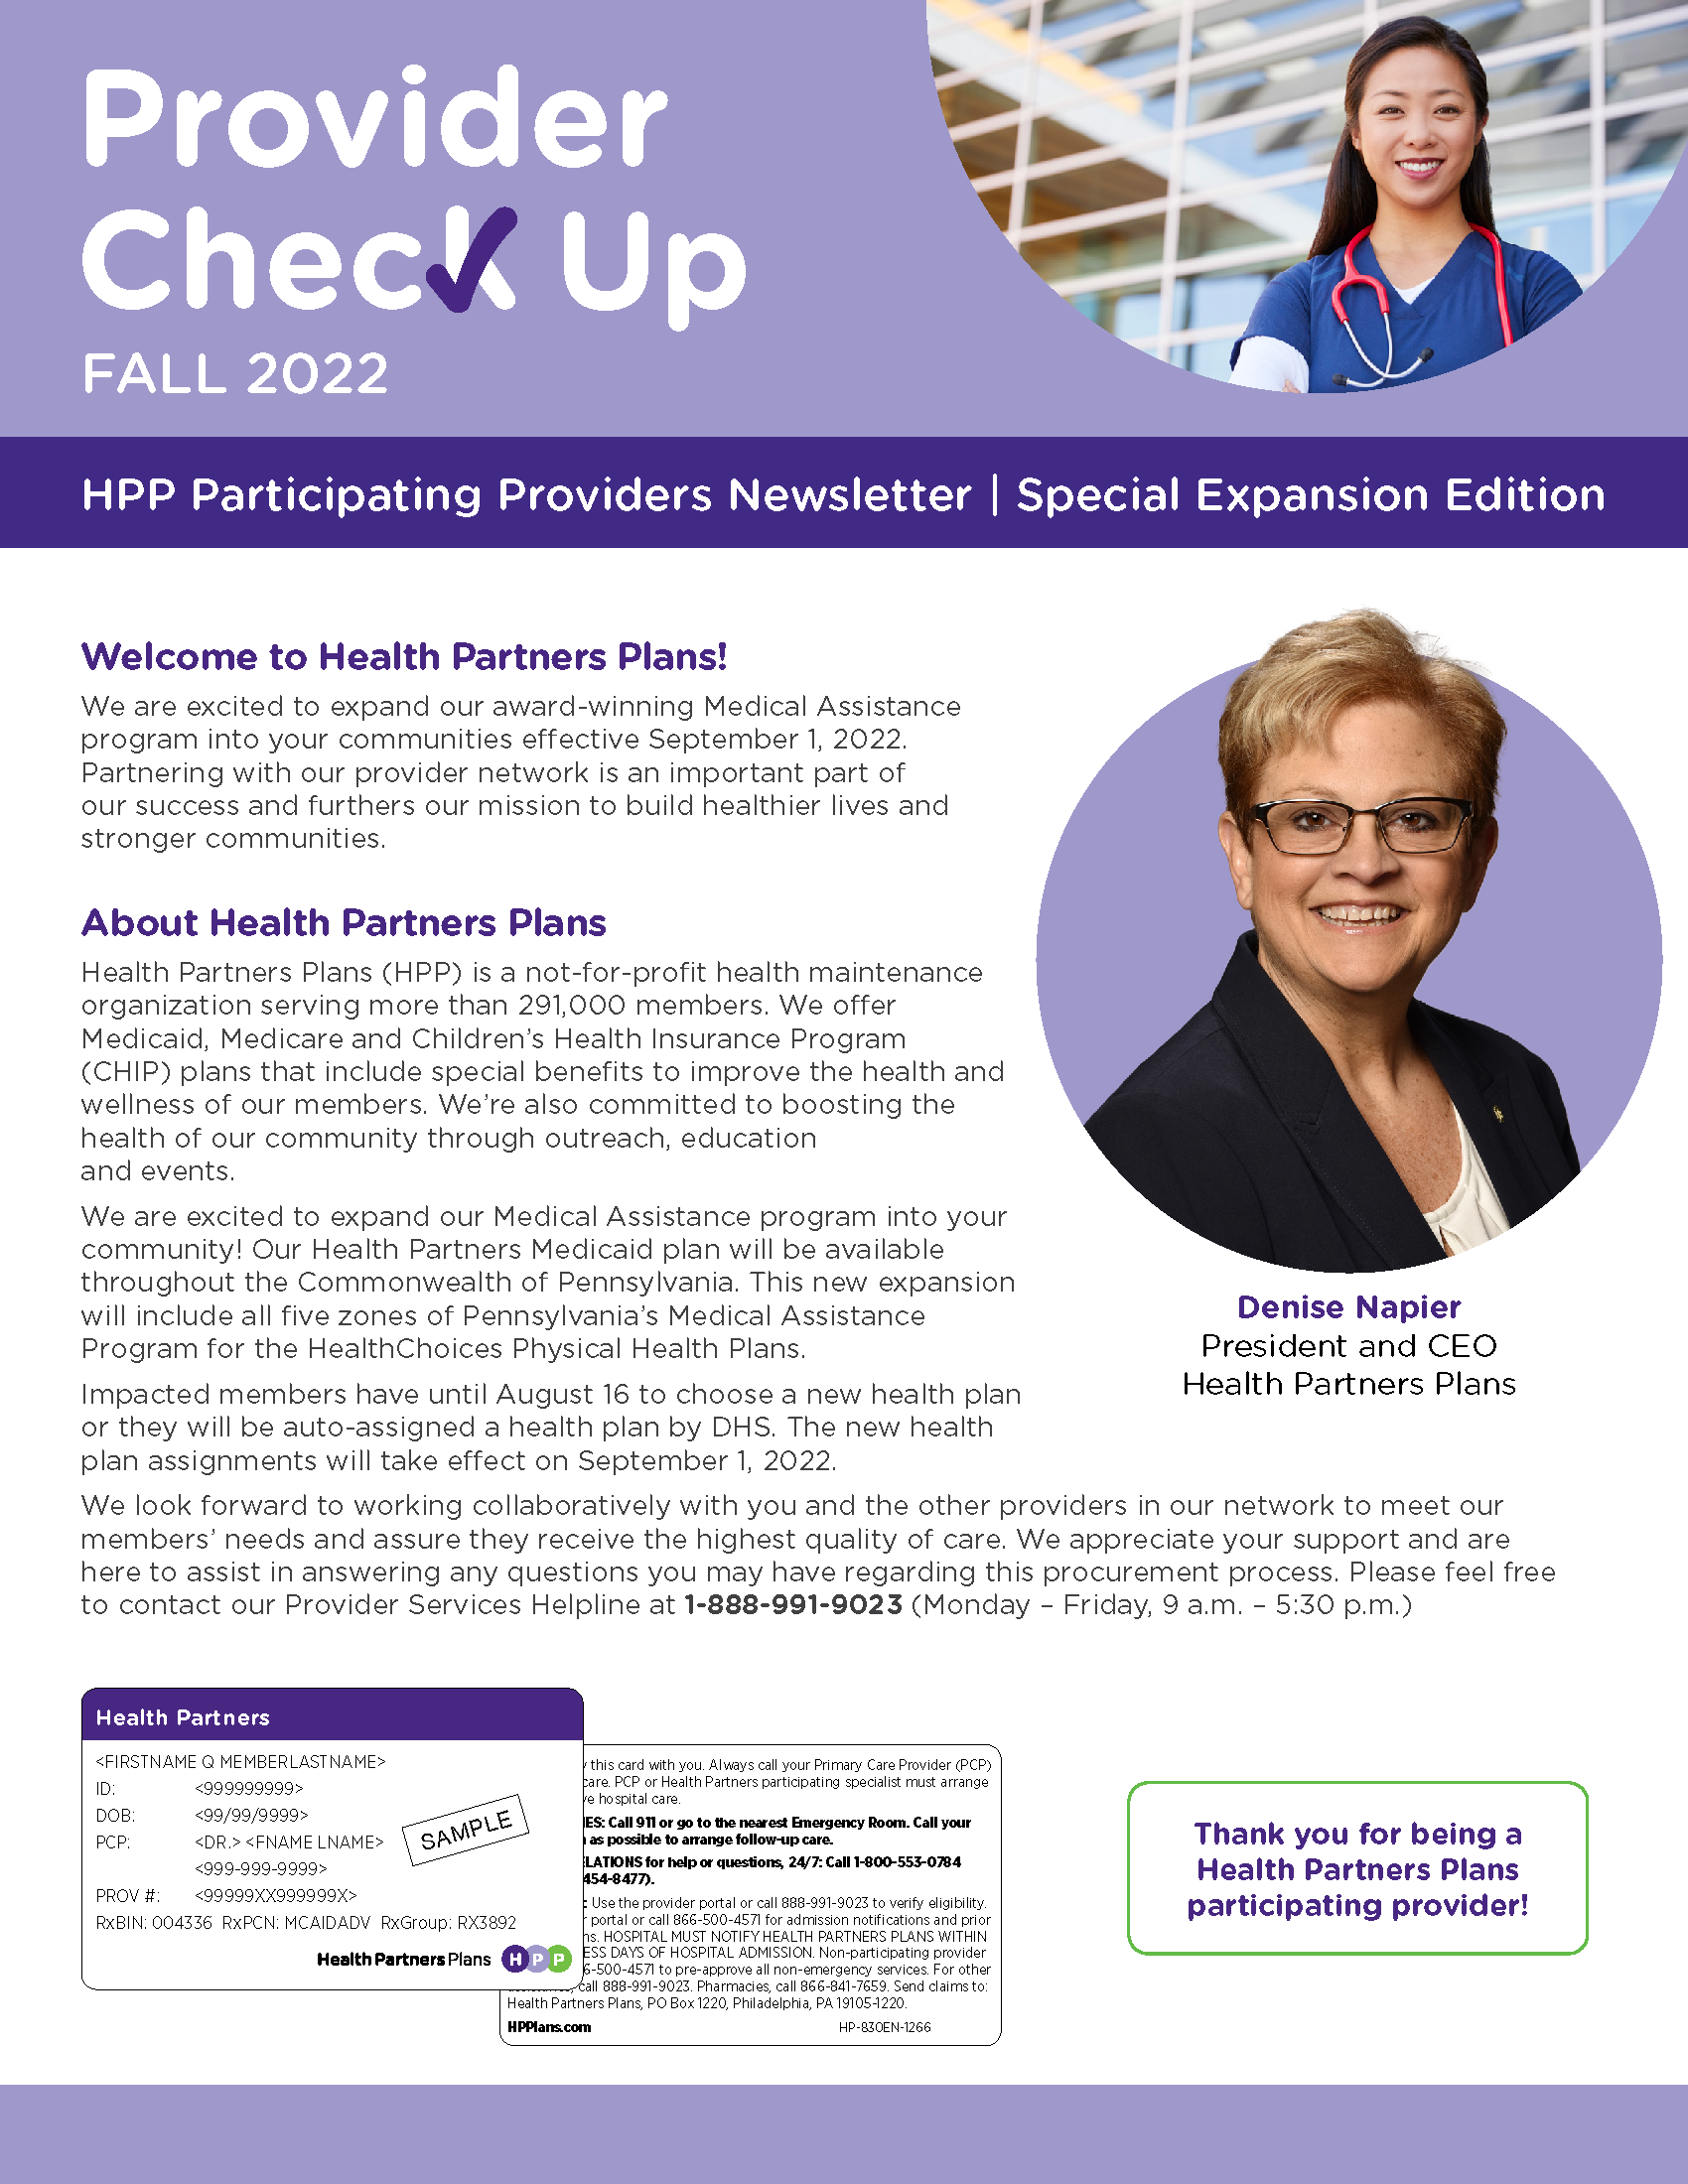 Expansion Issue of Provider Newsletter